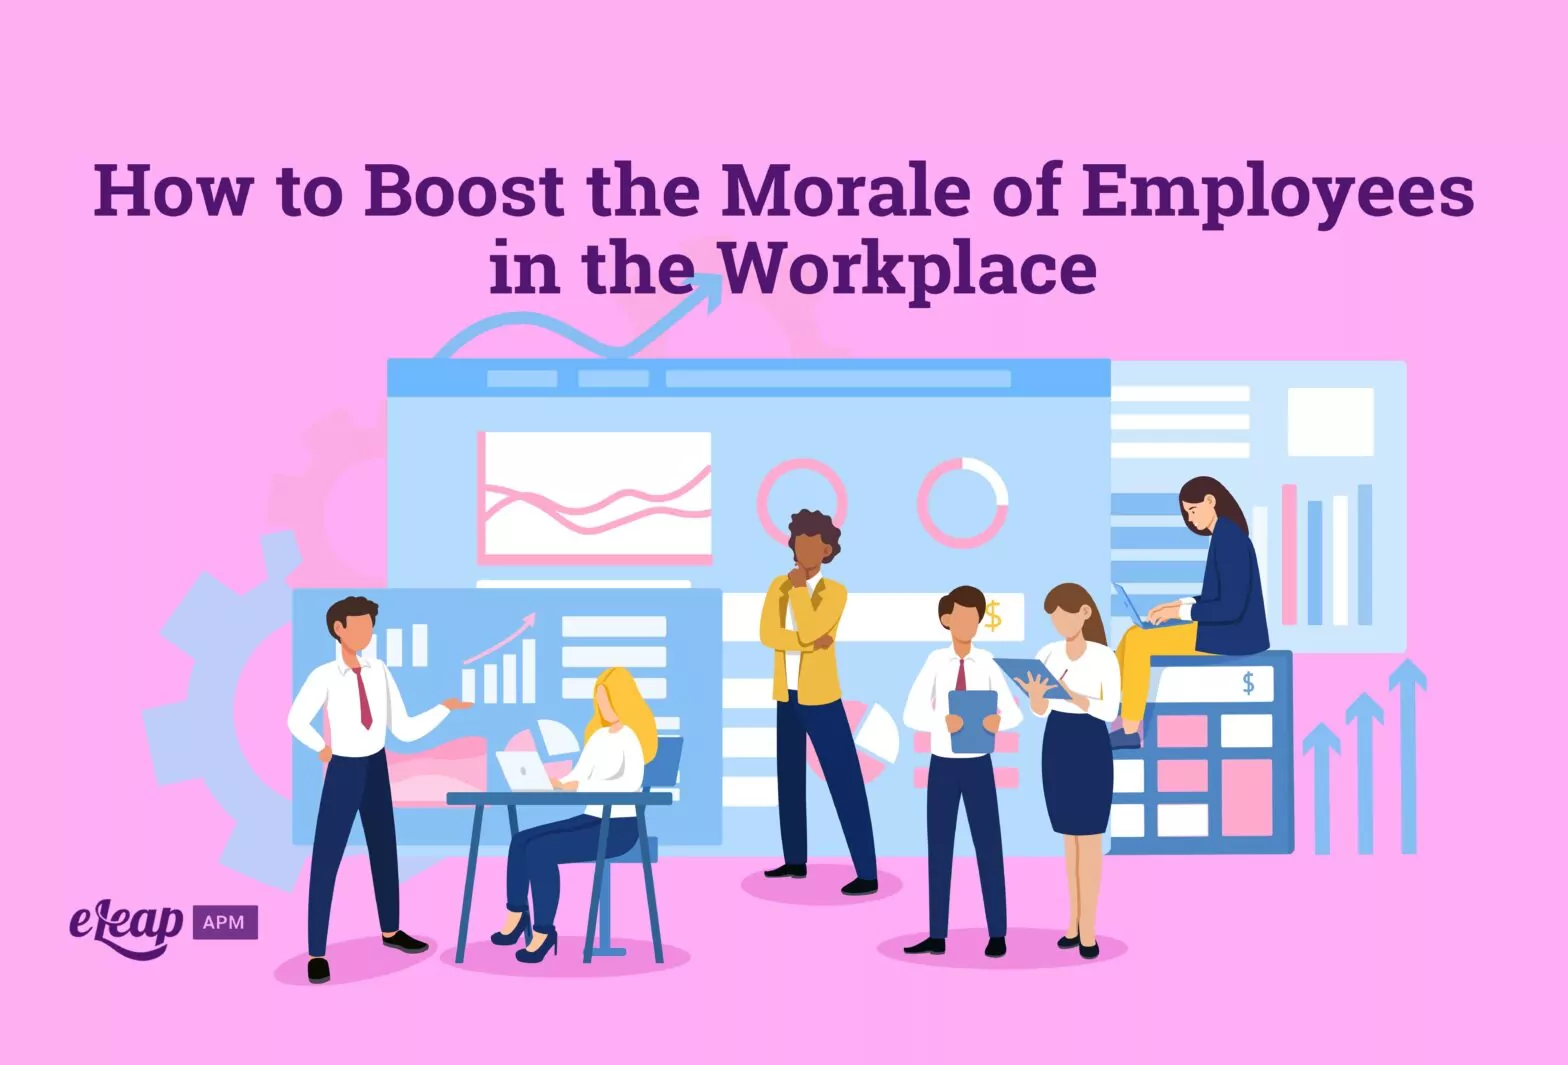 How to Boost the Morale of Employees in the Workplace